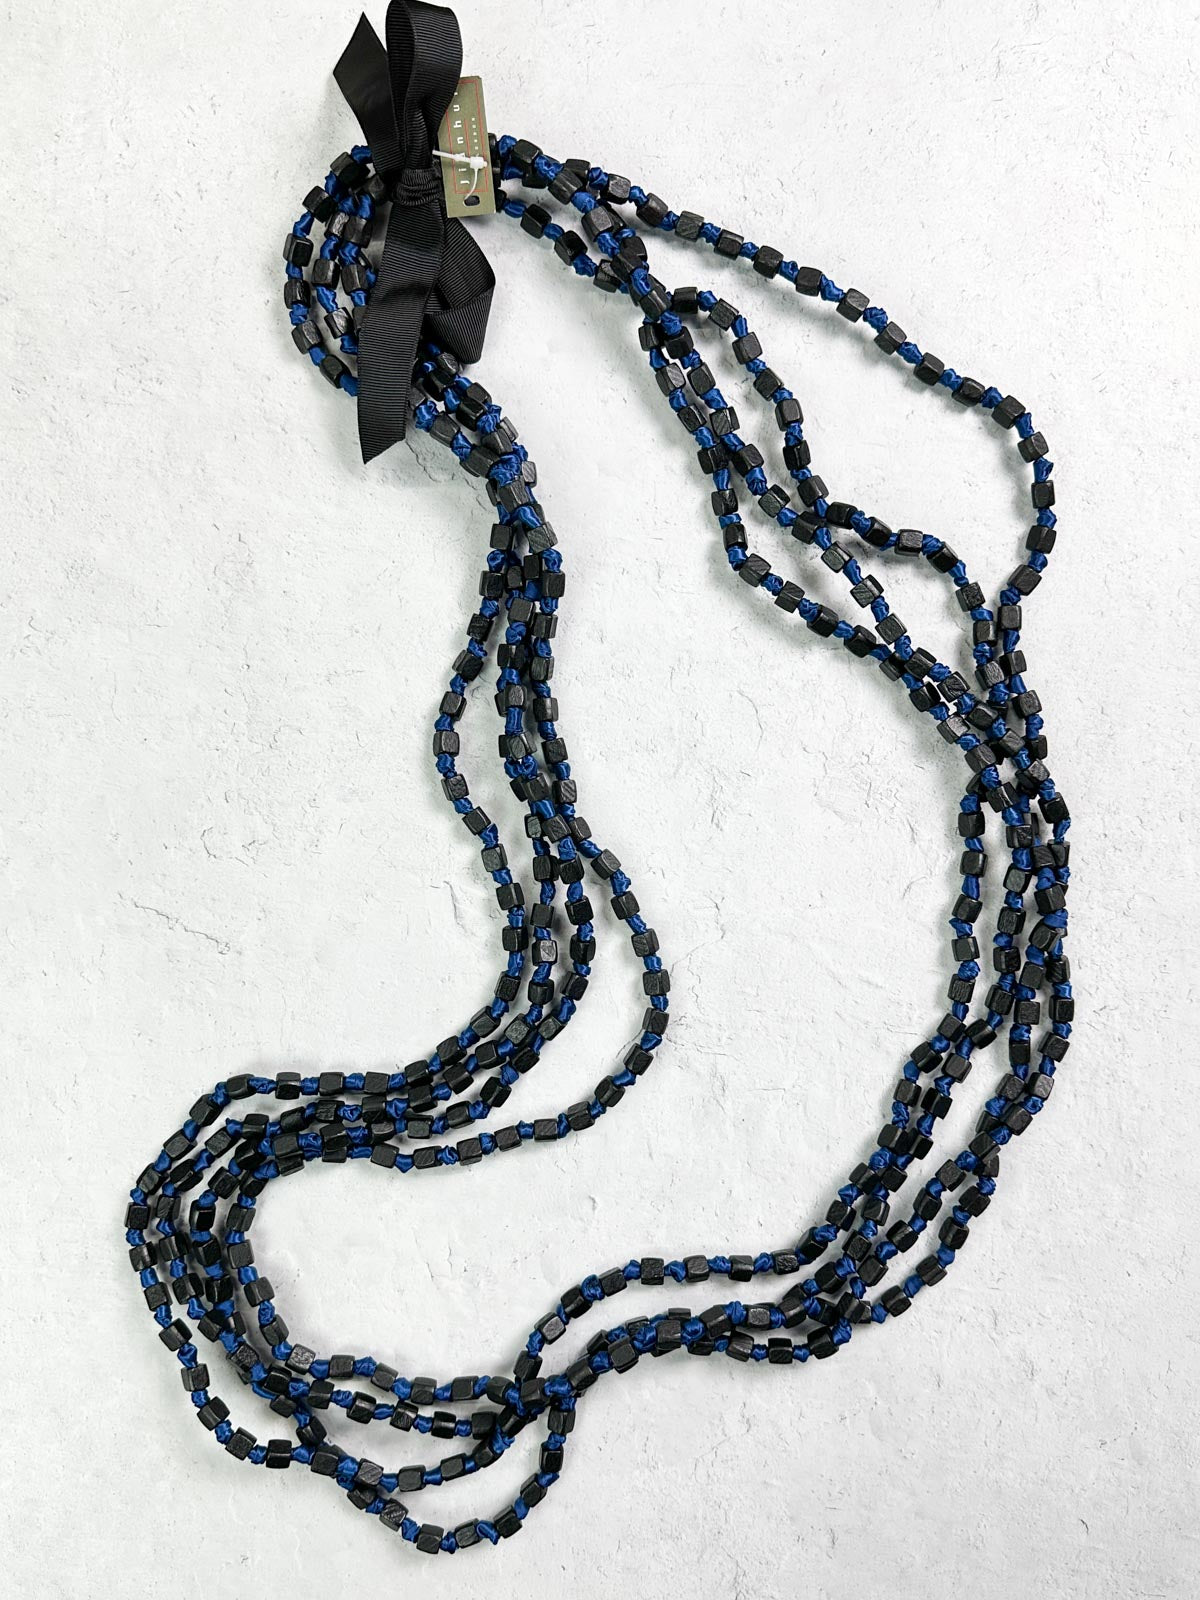 Jianhui London 4 Strand Square Bead on Knotted Cord Necklace, Black/Royal Blue - Statement Boutique